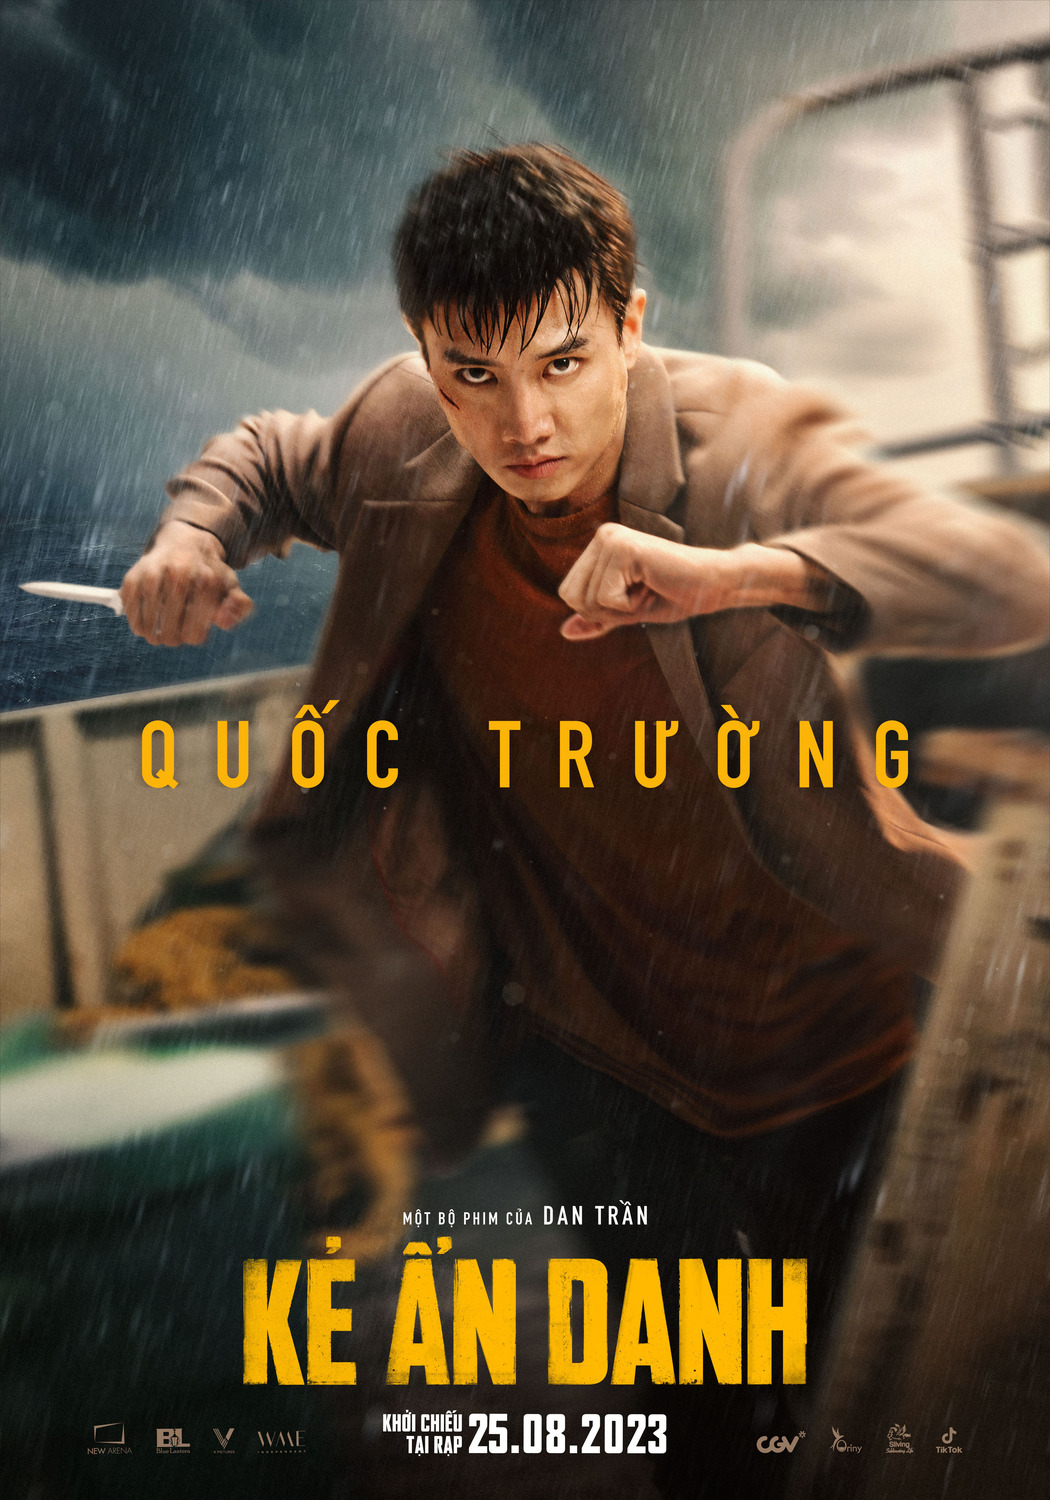 Extra Large Movie Poster Image for Kẻ Ẩn Danh (#11 of 13)